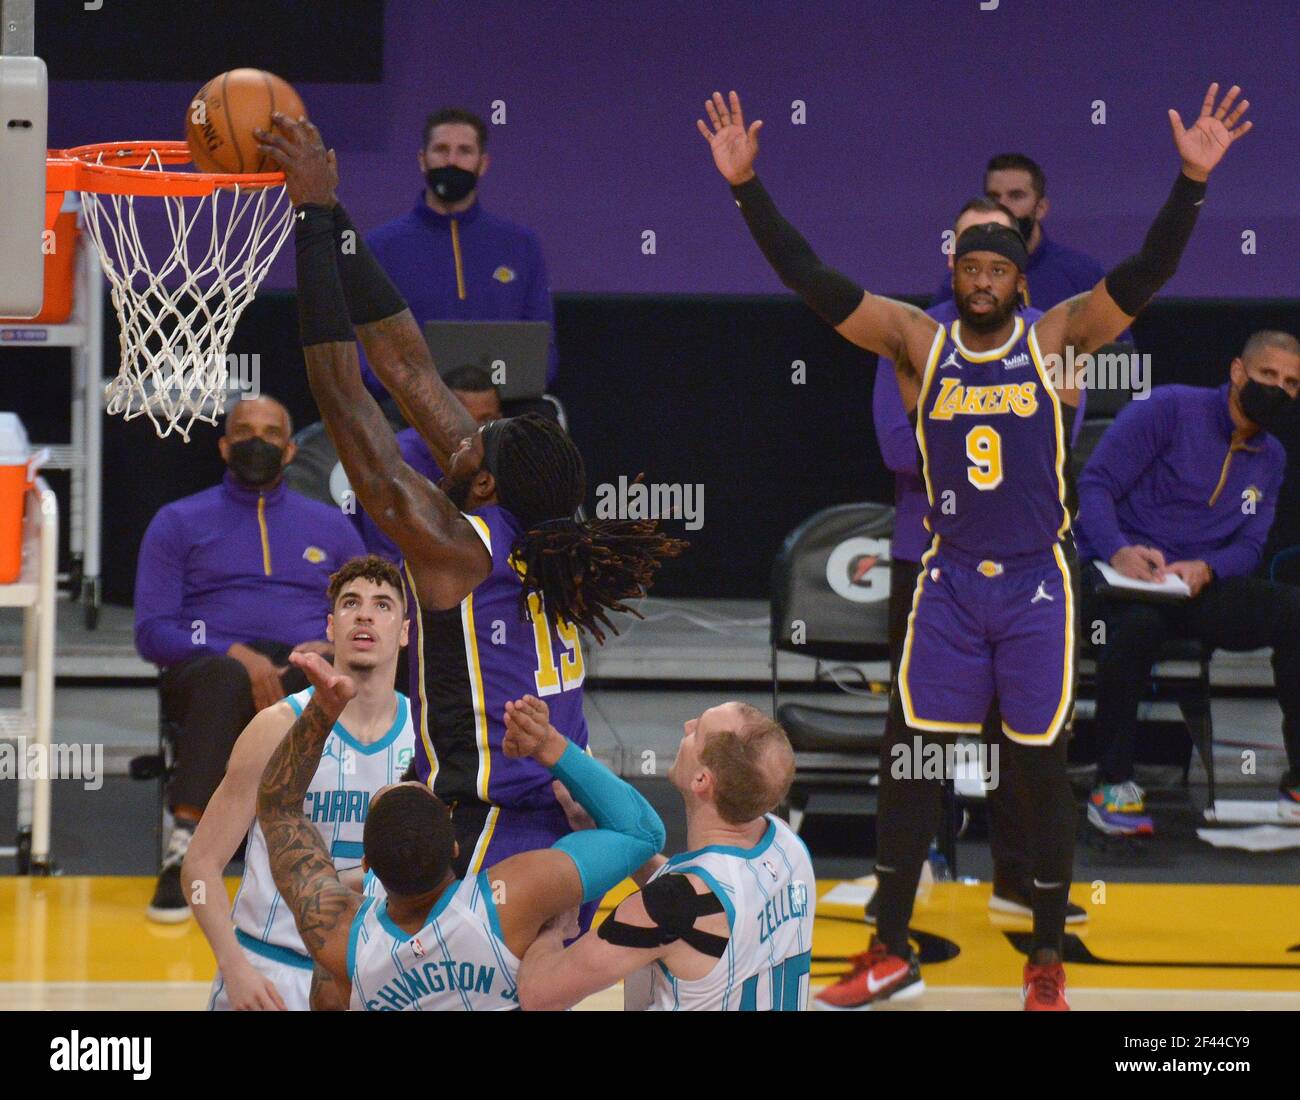 Los Angeles, United States. 18th Mar, 2021. Los Angeles Lakers' center Montrezl Harrell scores on Charlotte Hornets' defenders during the first half at Staples Center in Los Angeles on Thursday, March 18, 2021. The Lakers defeated the Hornets 116-105. Photo by Jim Ruymen/UPI Credit: UPI/Alamy Live News Credit: UPI/Alamy Live News Stock Photo